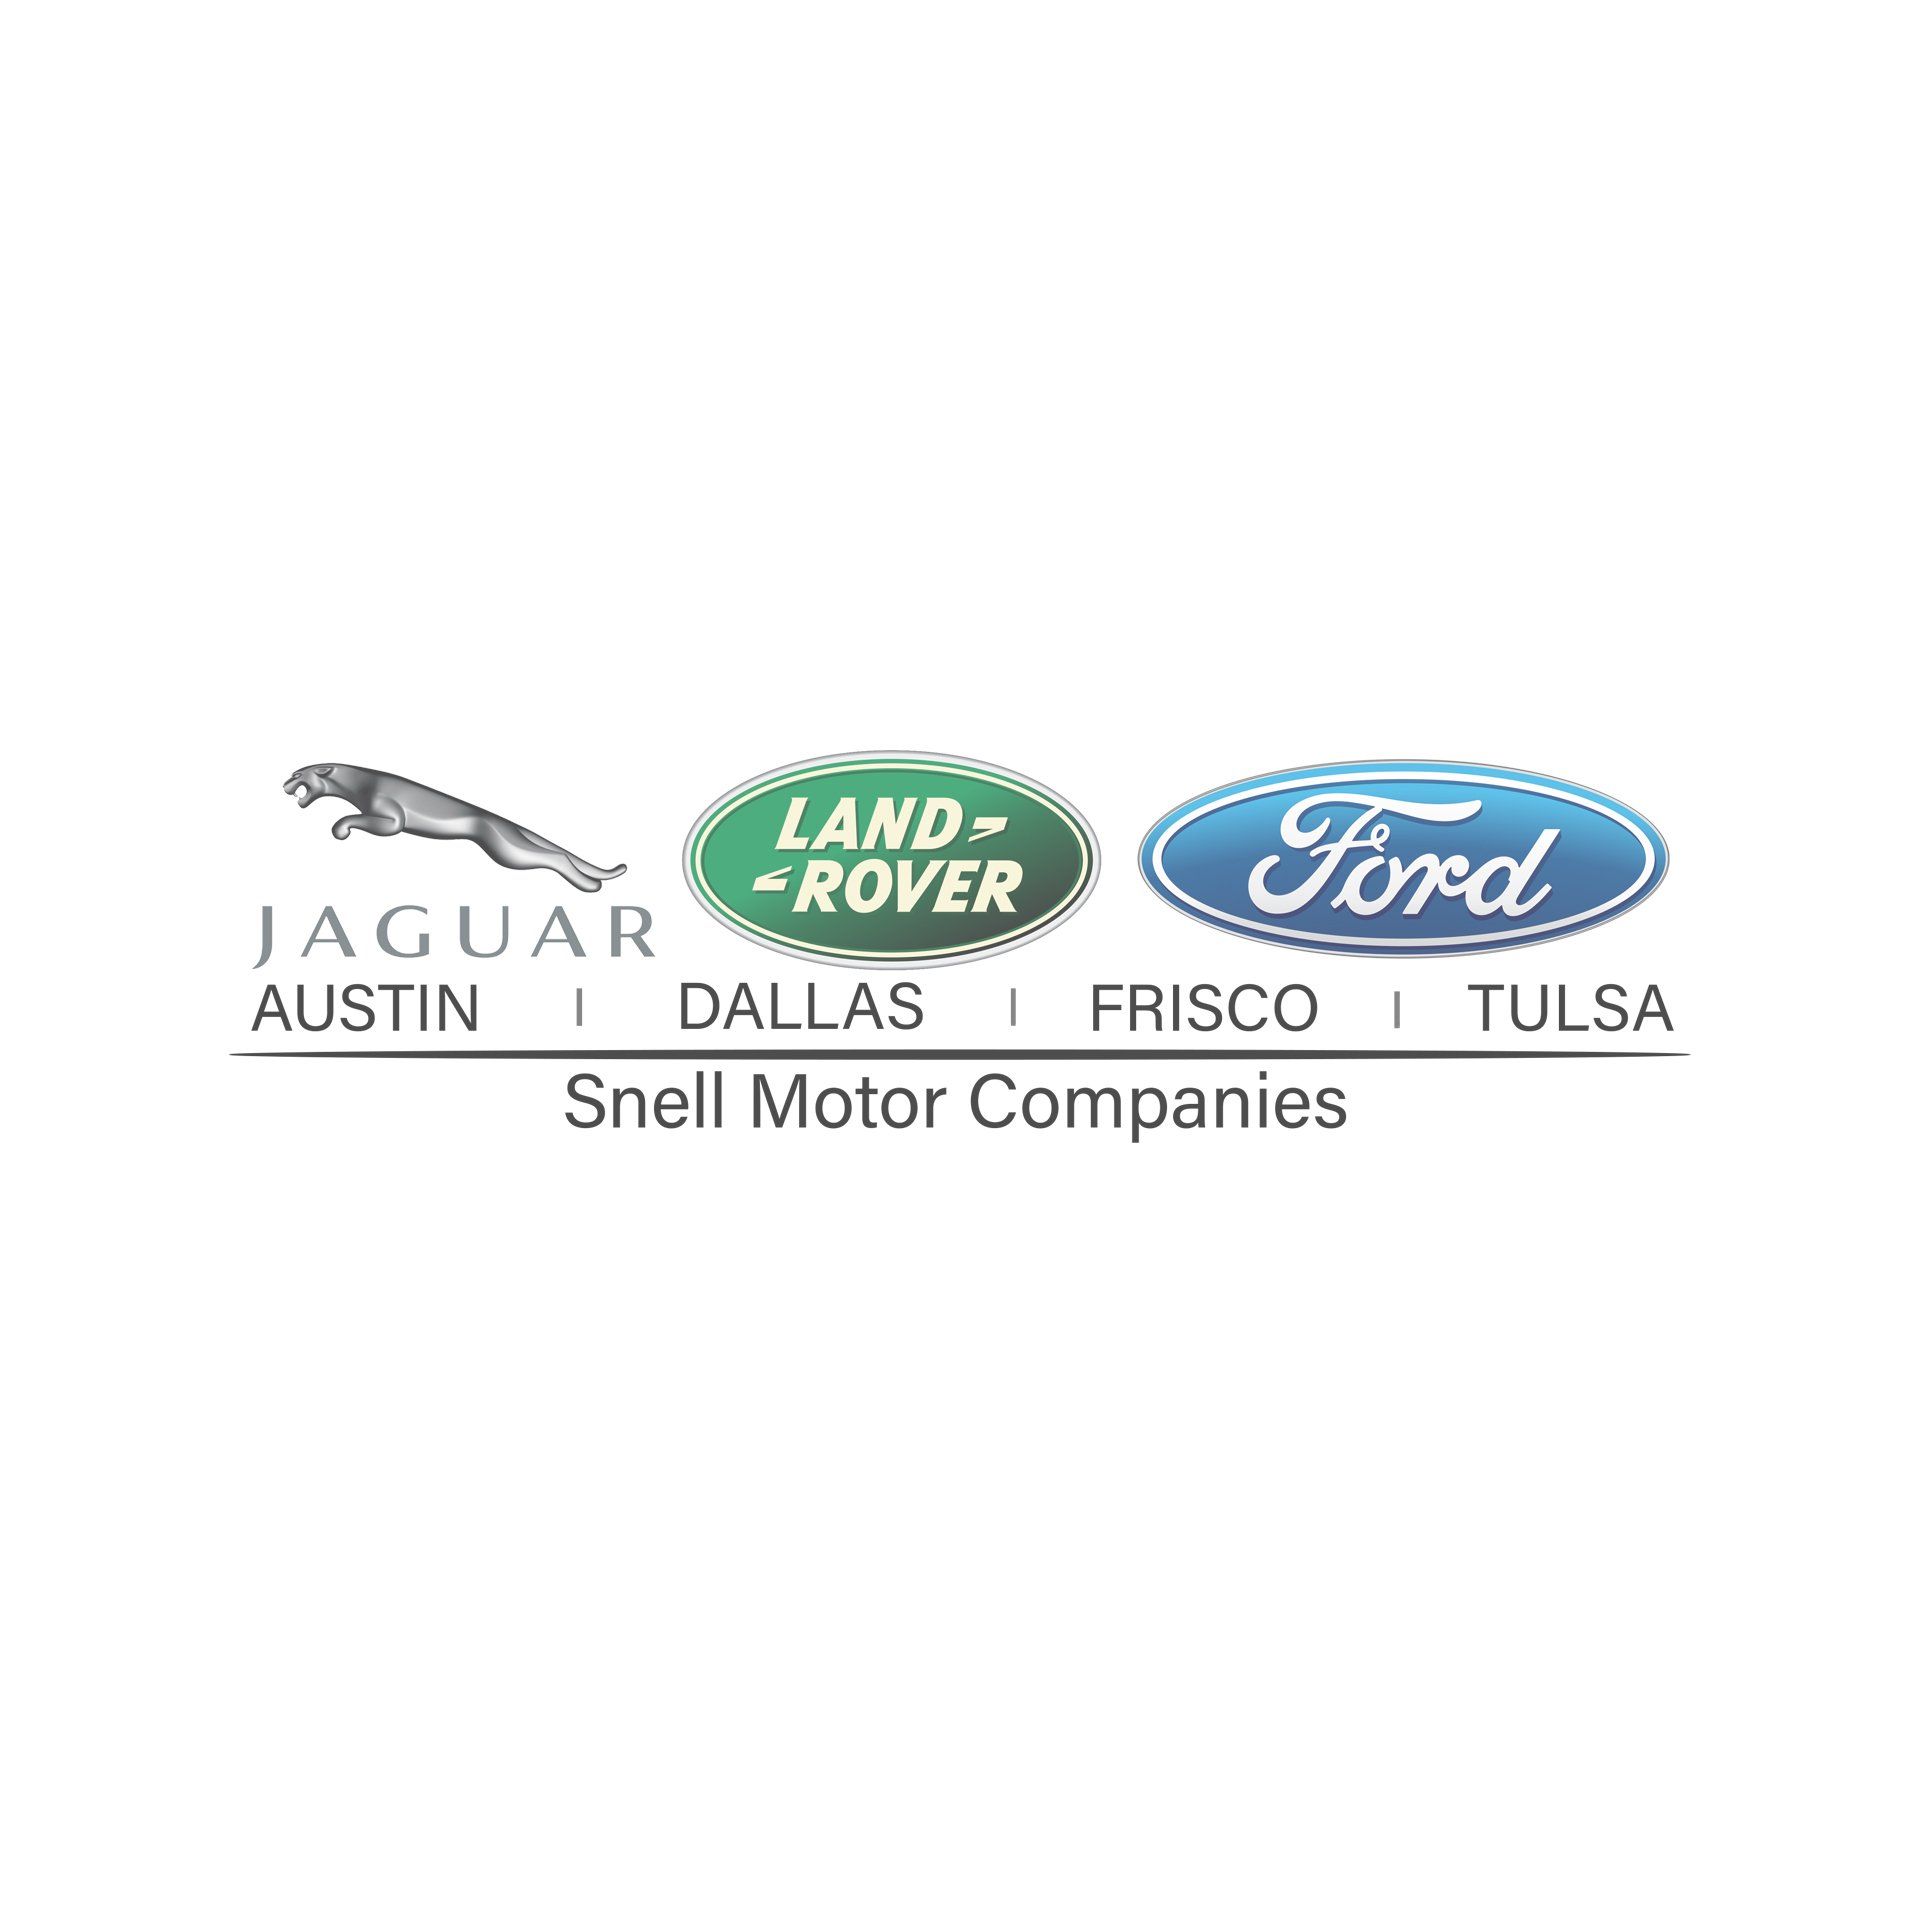 A logo for jaguar land rover and ford motor companies